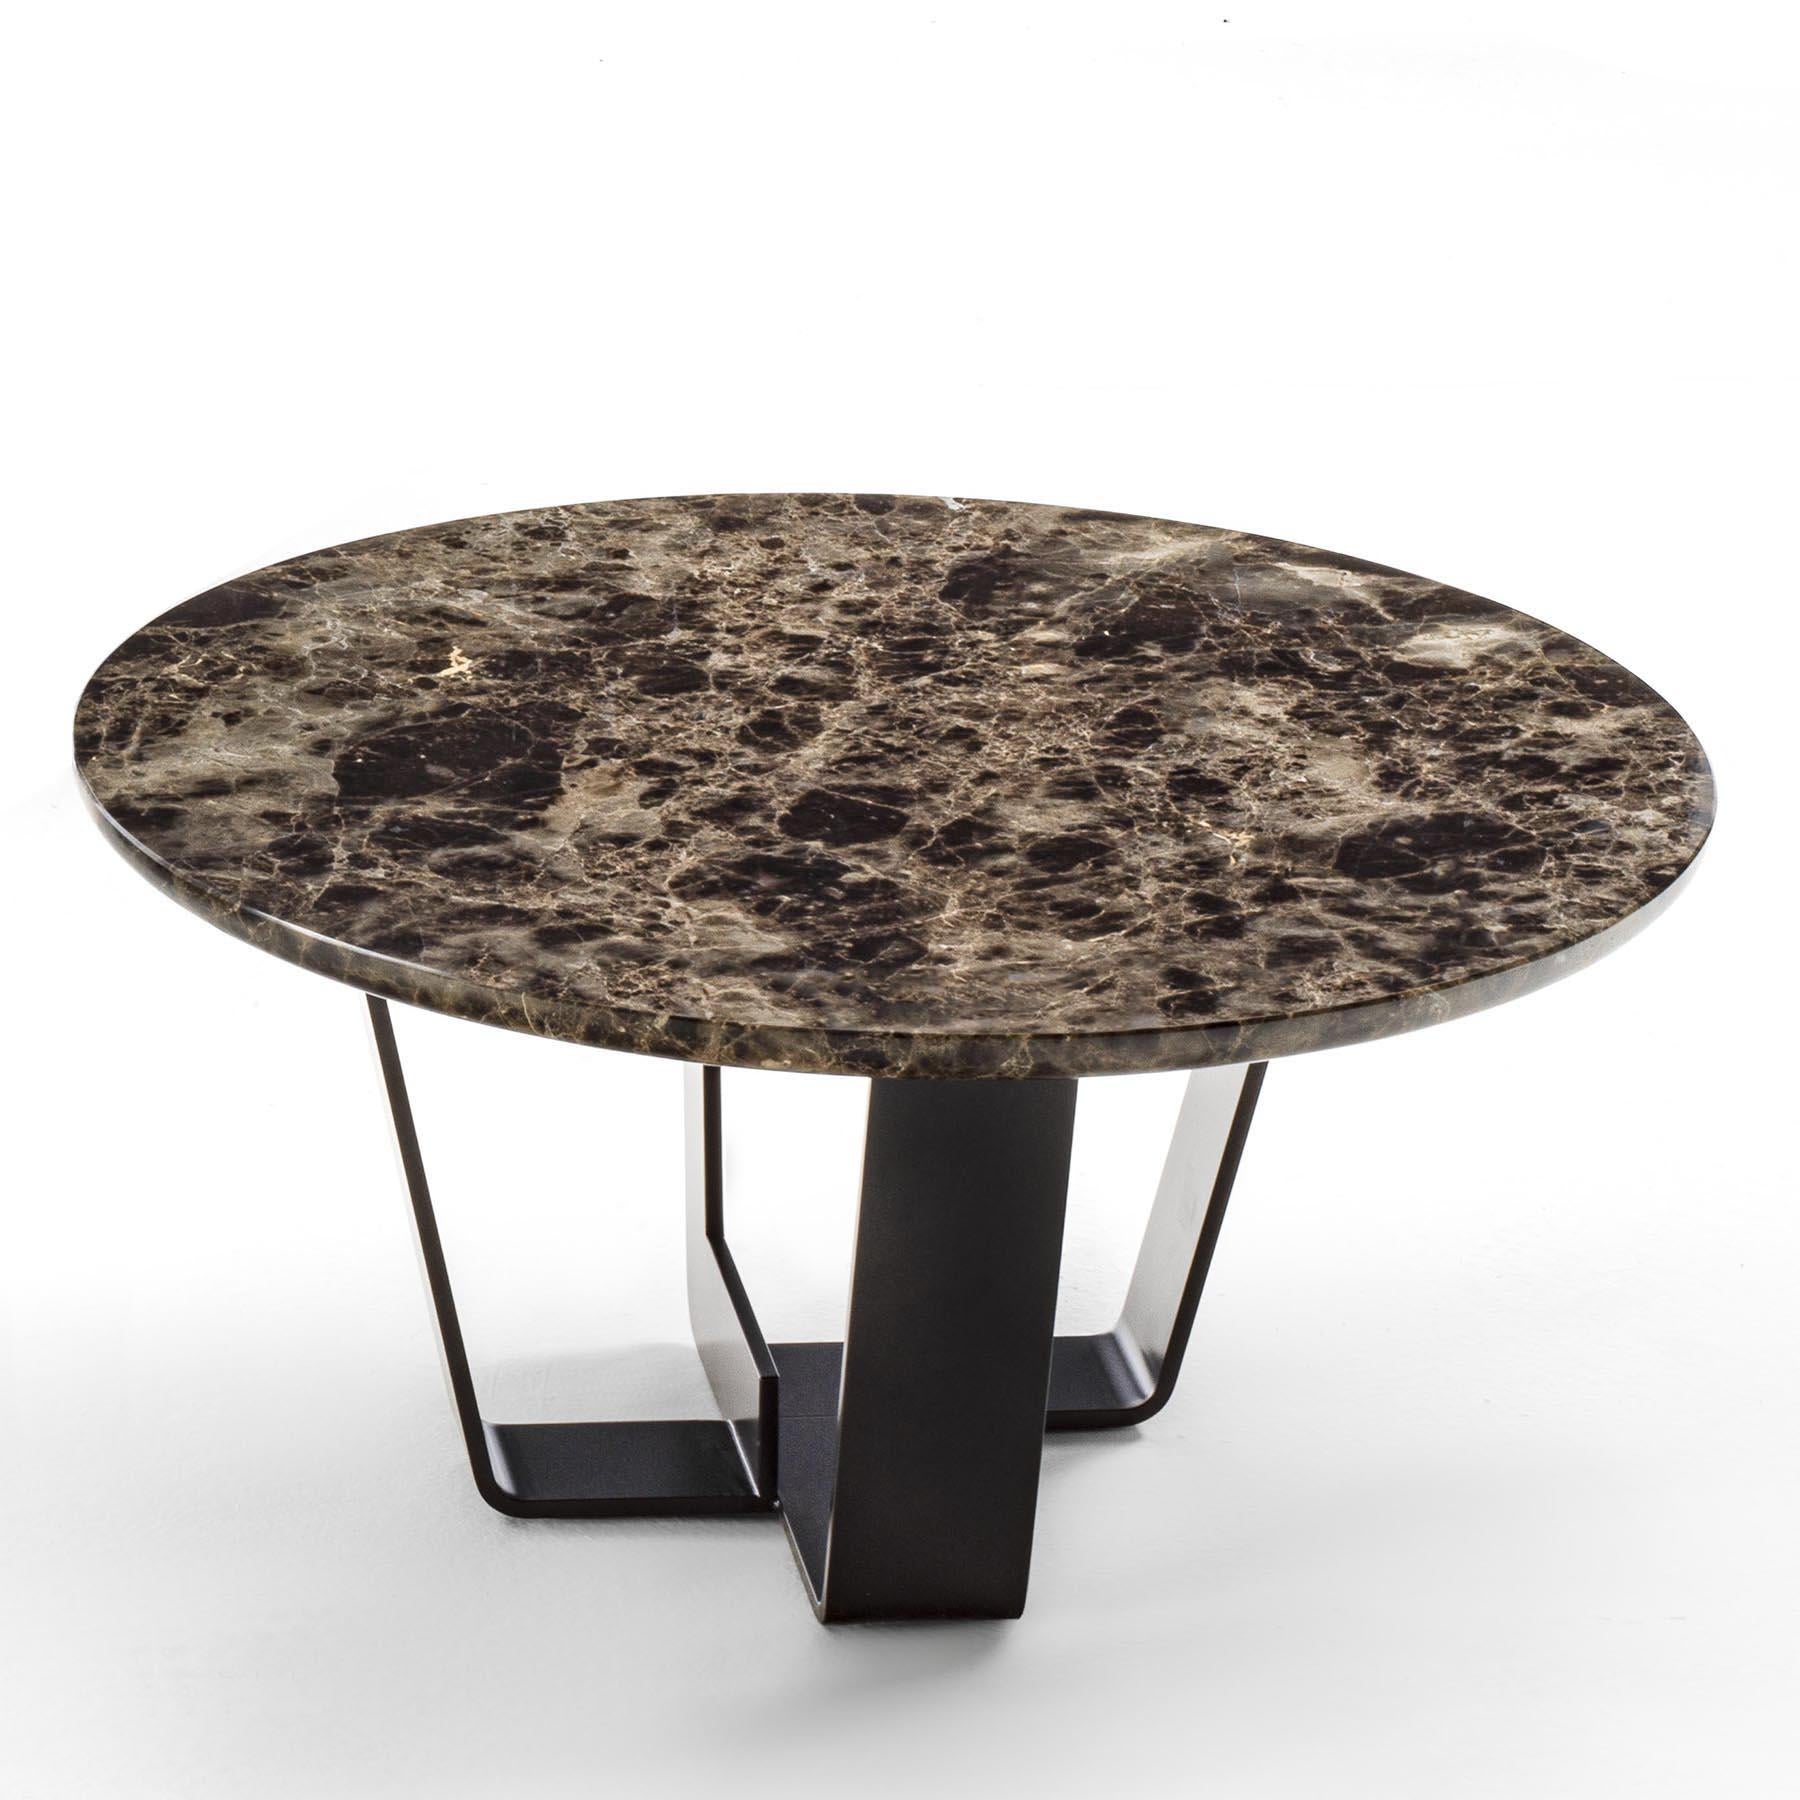 Coffee table Jay Marble with base structure in 
lacquered iron in irondust finish. With emperador
dark marble top.
Also available with verde alpi marble top.